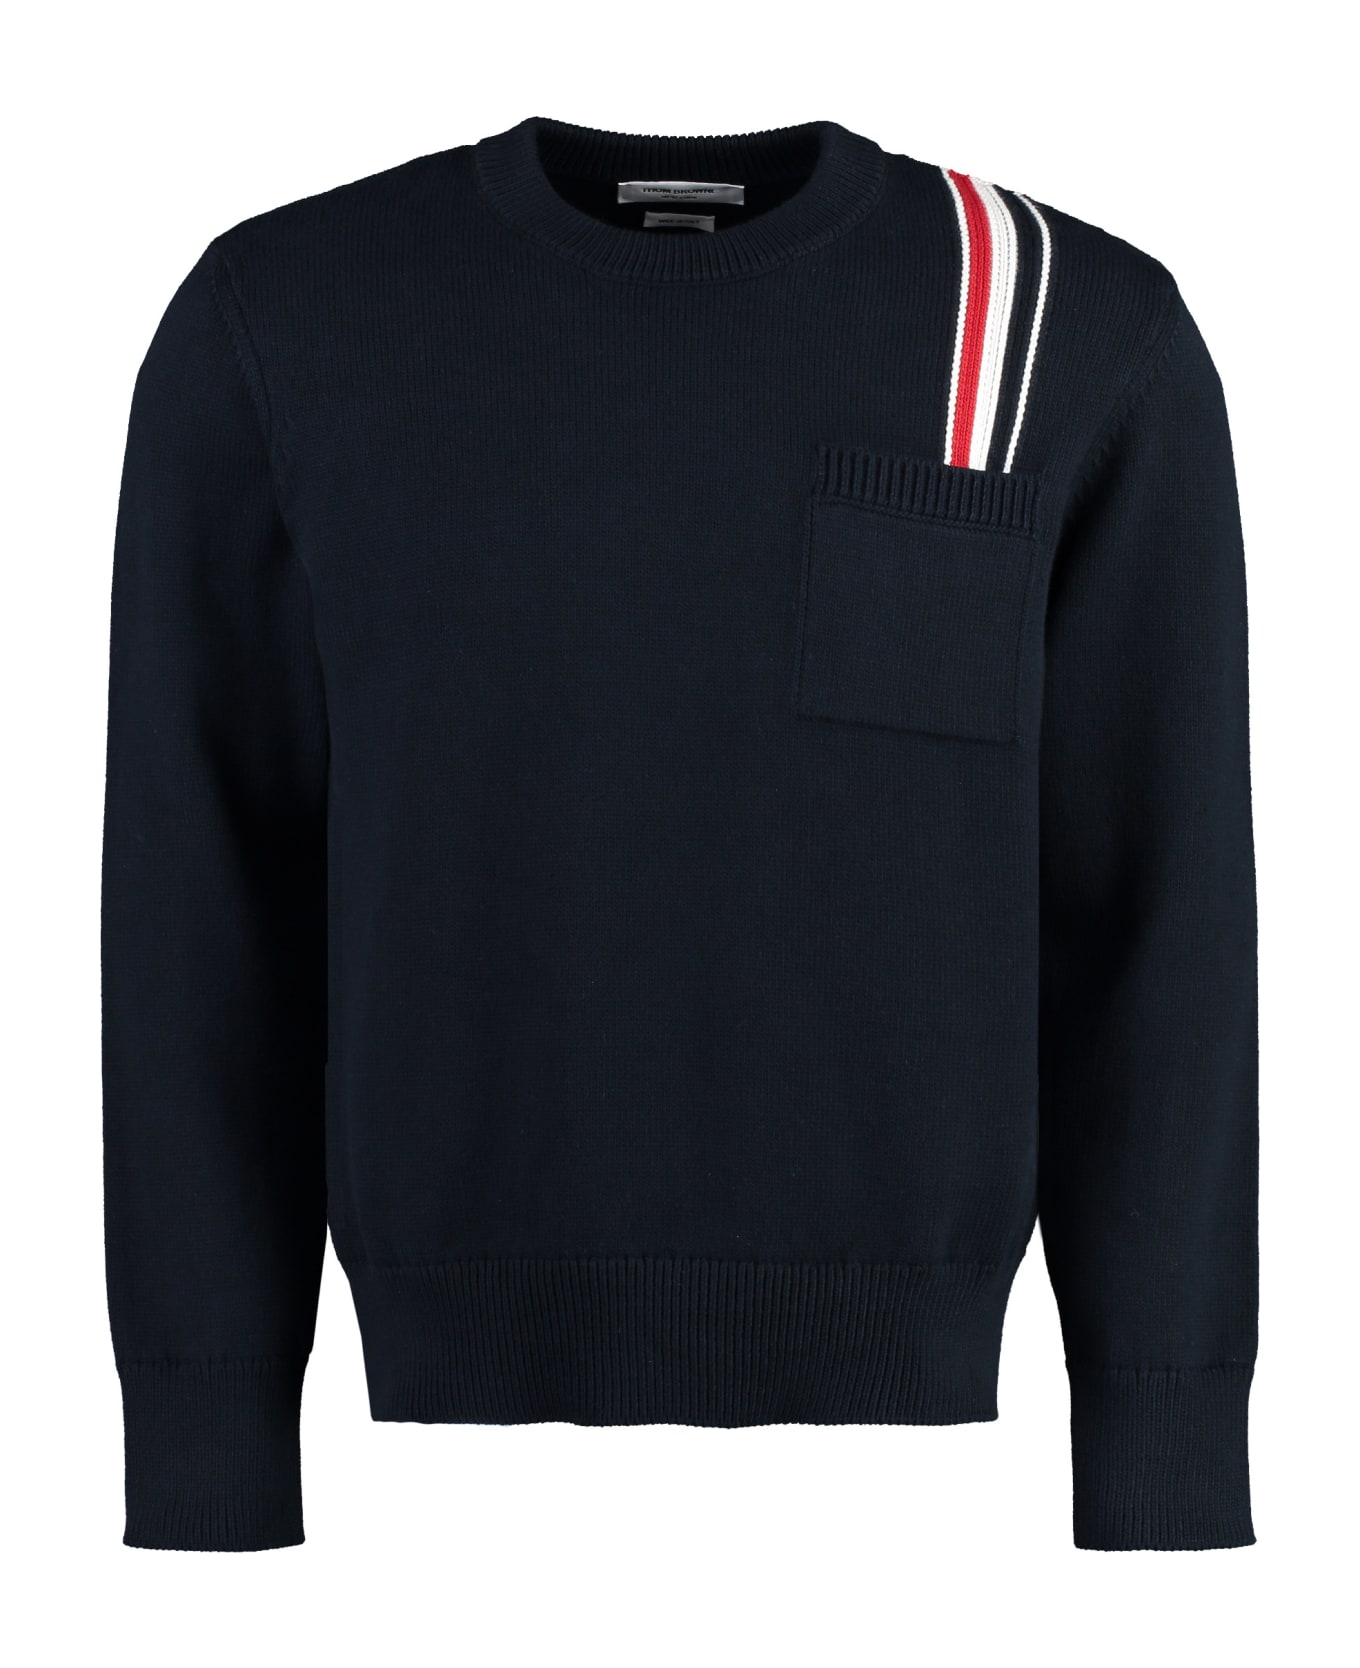 Thom Browne Jersey Stitch Relaxed Fit Crewneck Pullover - Navy